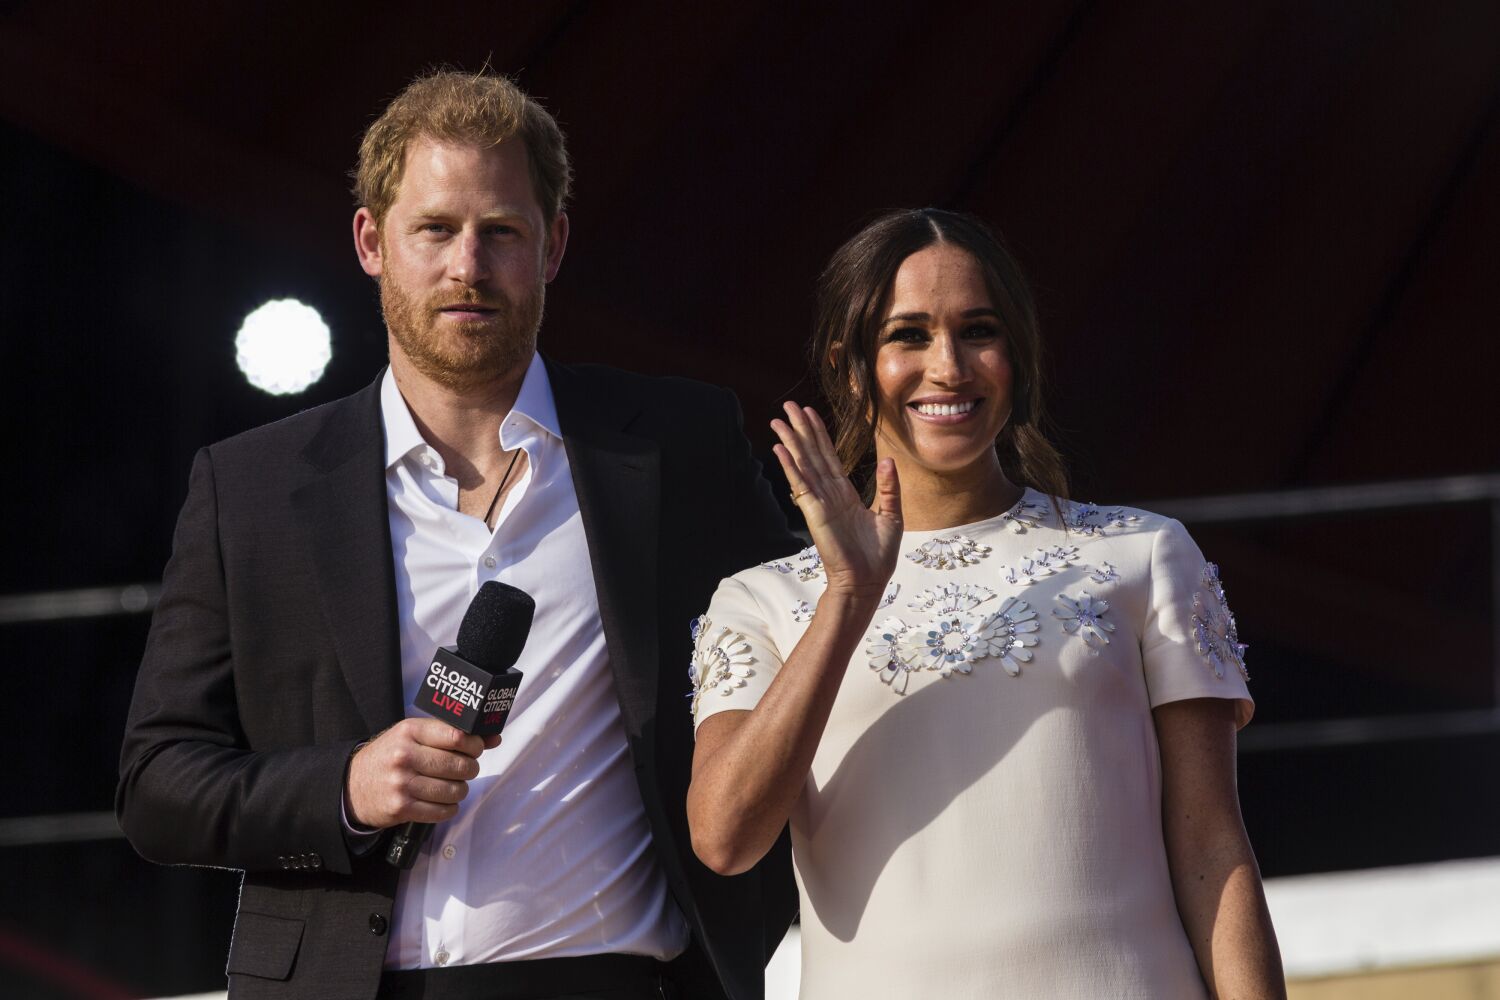 Lake Elsinore man accused of stalking near Harry and Meghan's Montecito home